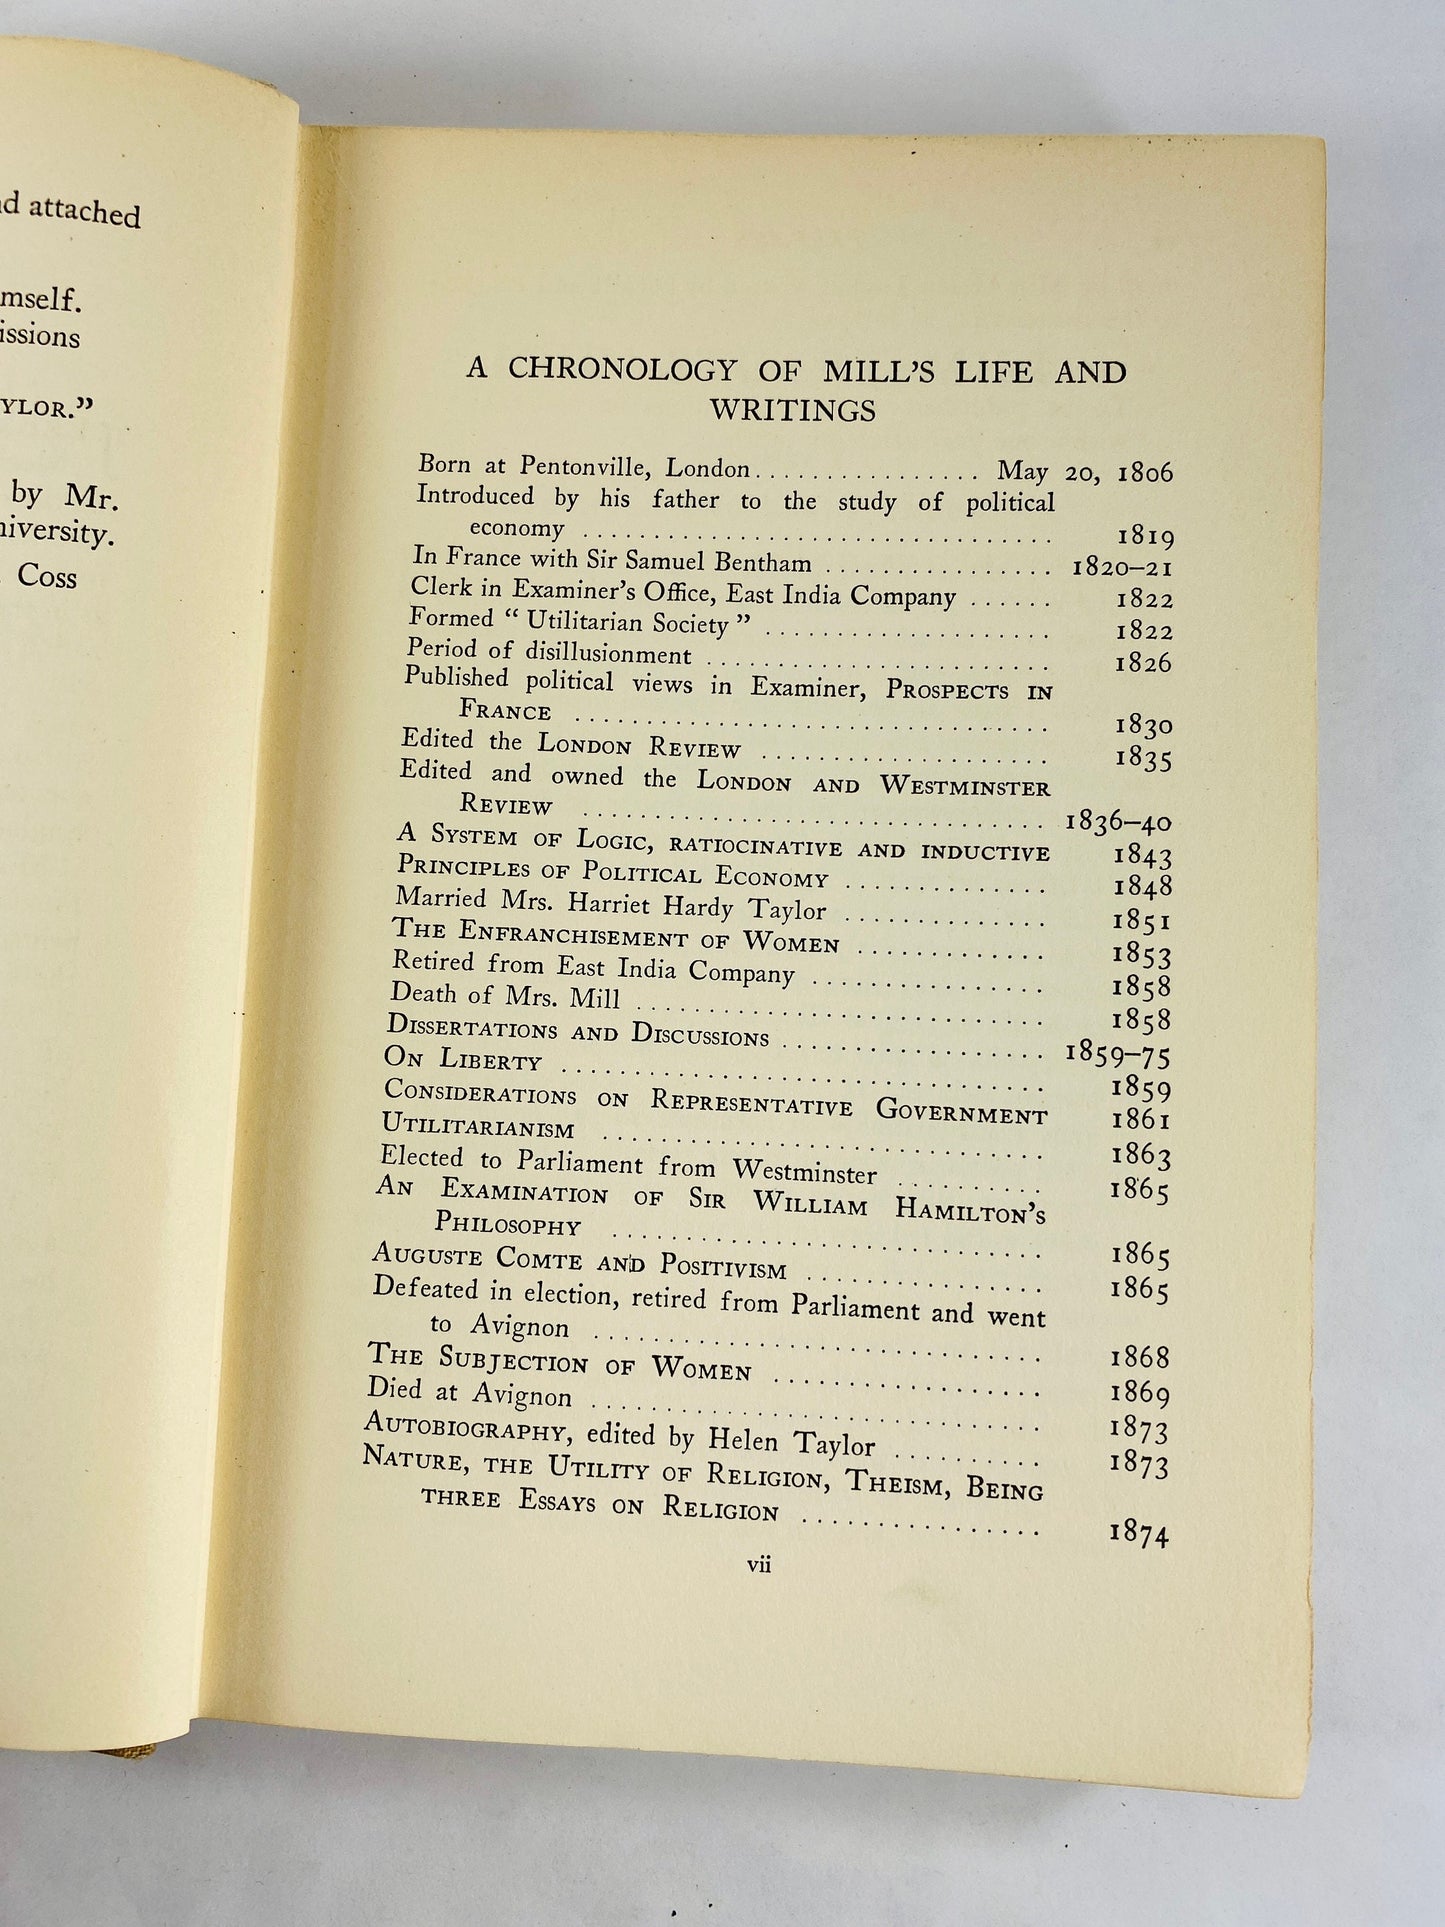 John Stuart Mill Autobiography vintage book circa 1924 Oxford Press. Utilitarianism society and government philosophy.